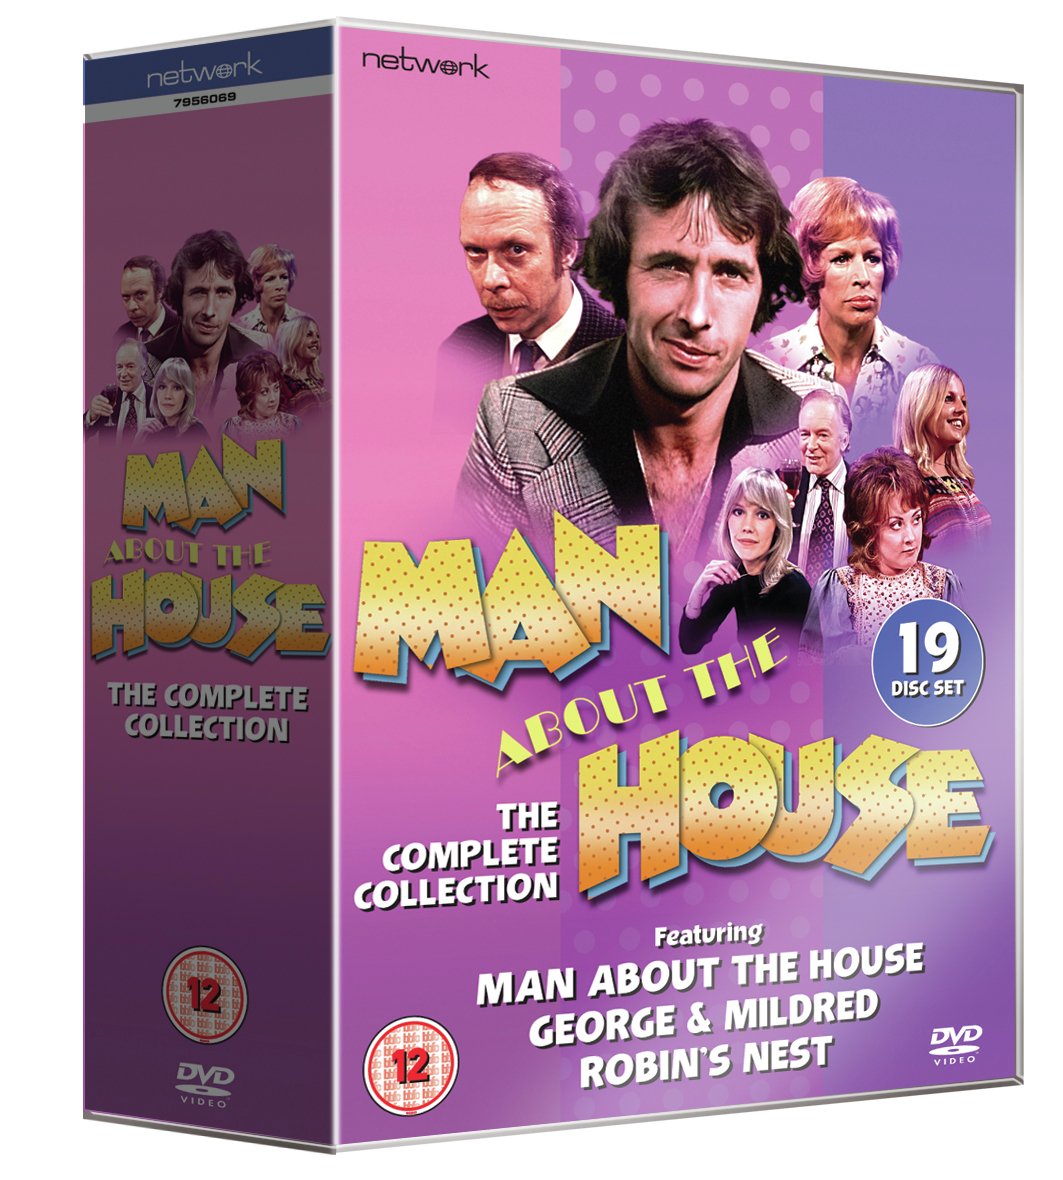 Man About The House: The Complete Collection DVD Box Set